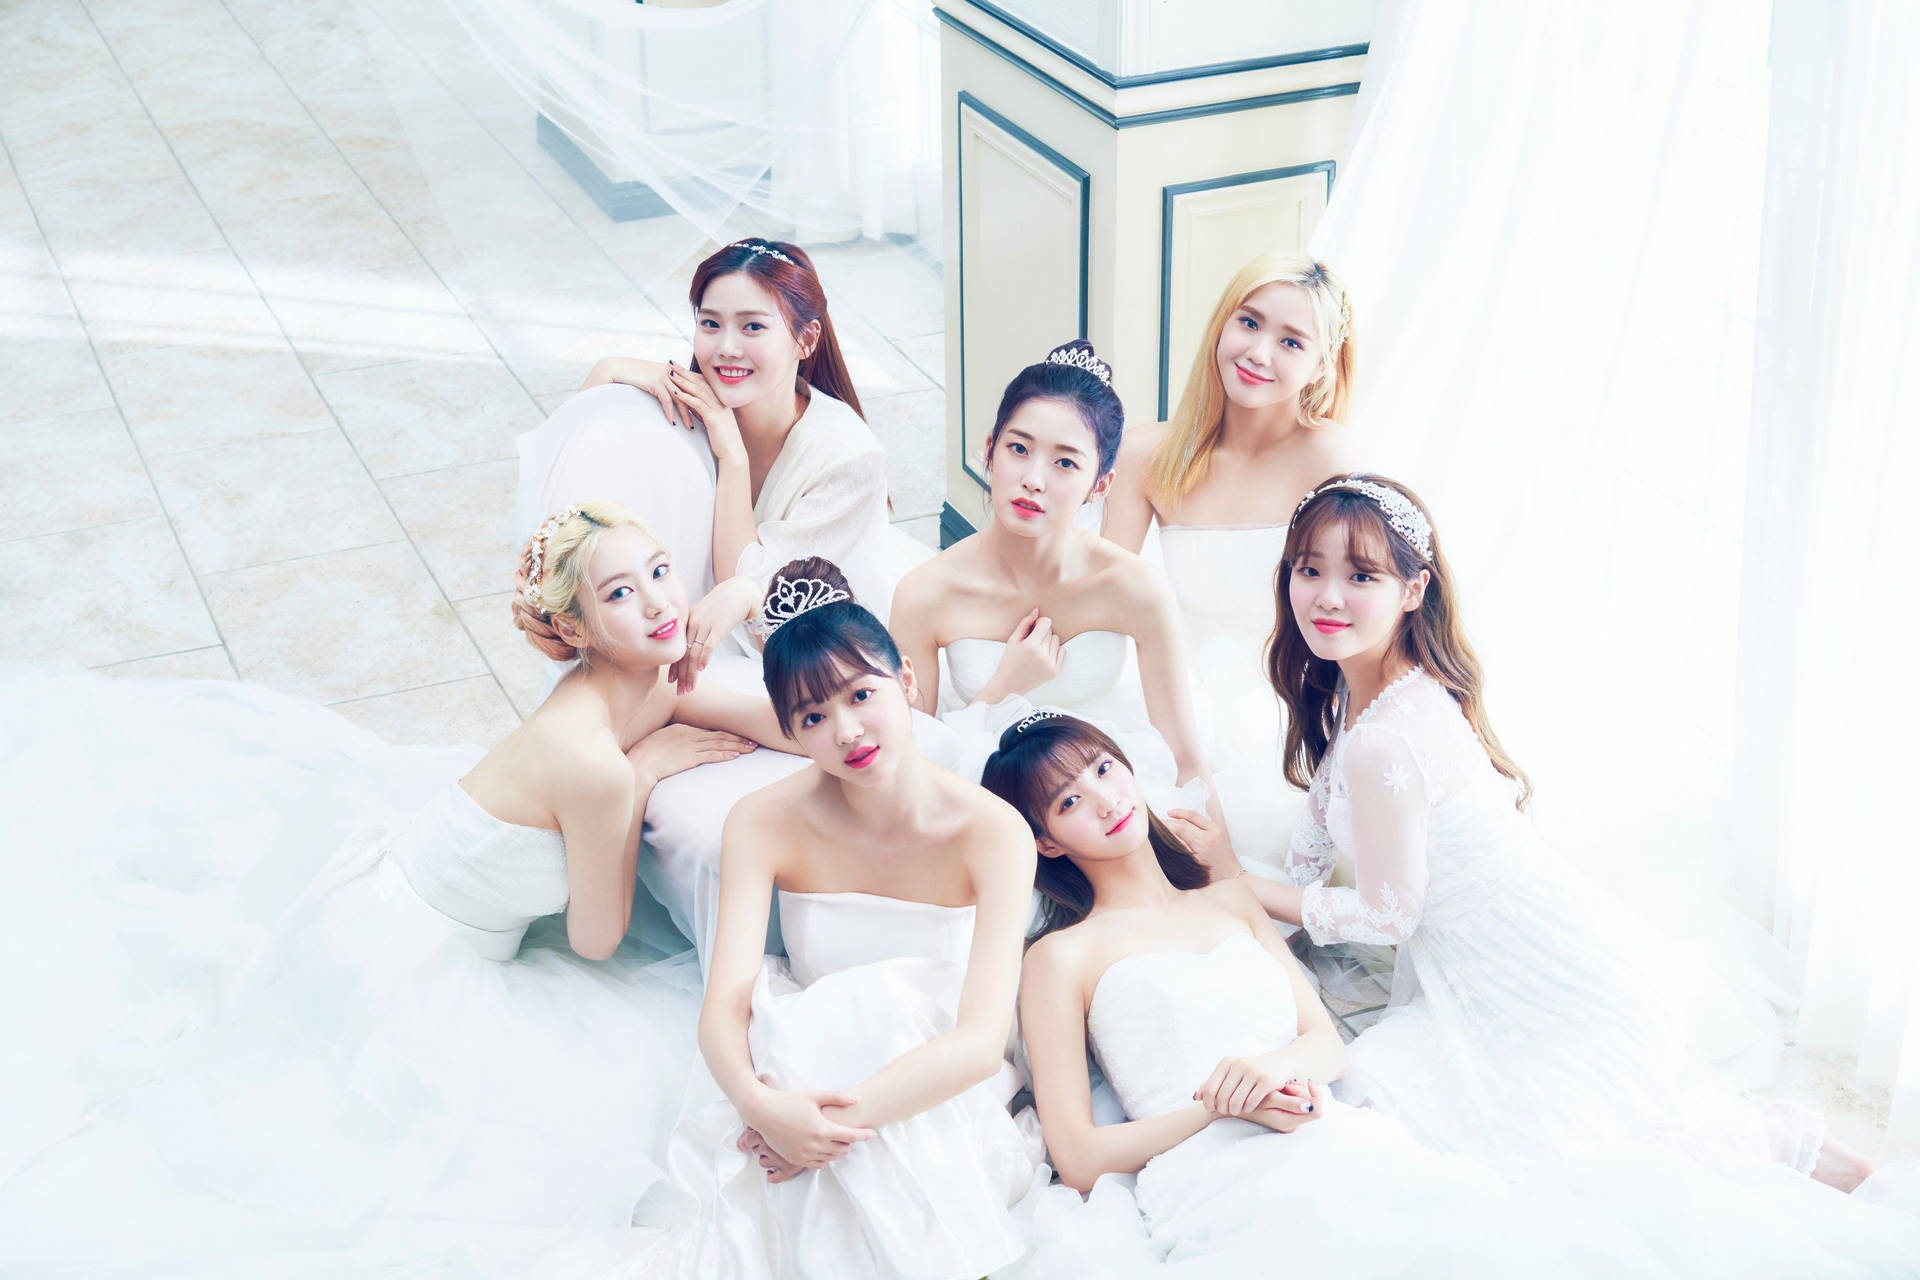 Enchanting Oh My Girl in Ethereal White Gowns Wallpaper